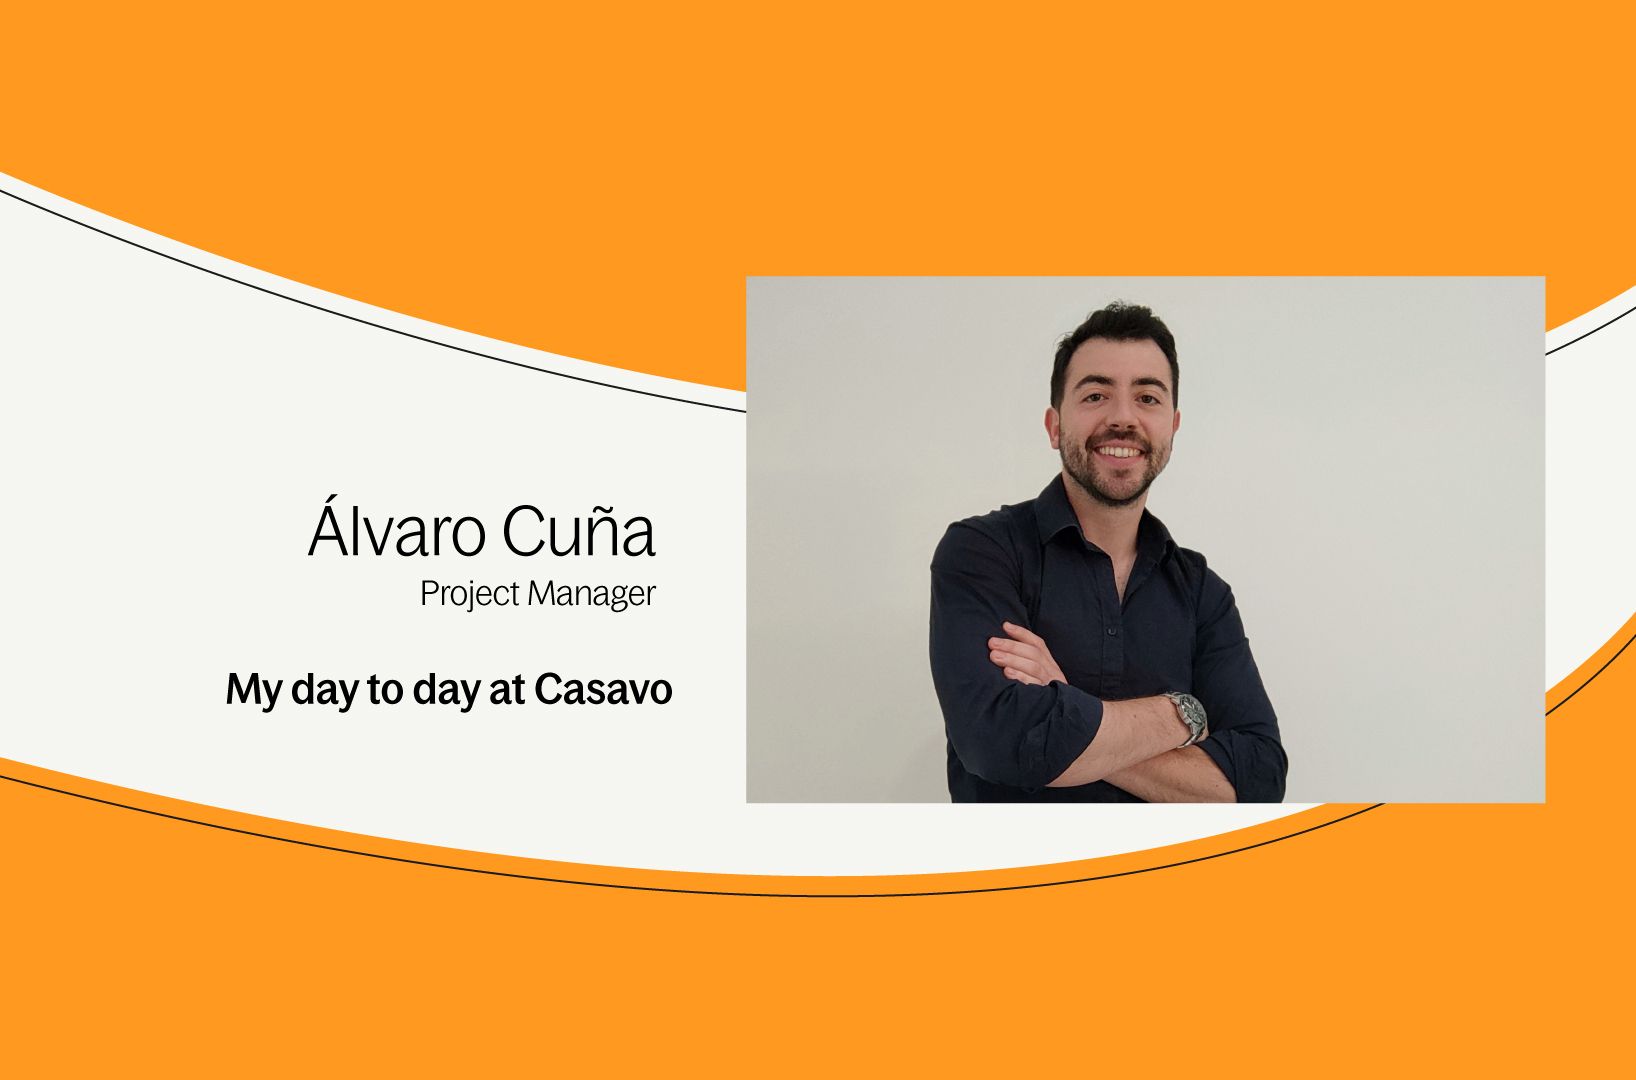 A day at Casavo as Construction Project Manager: Álvaro